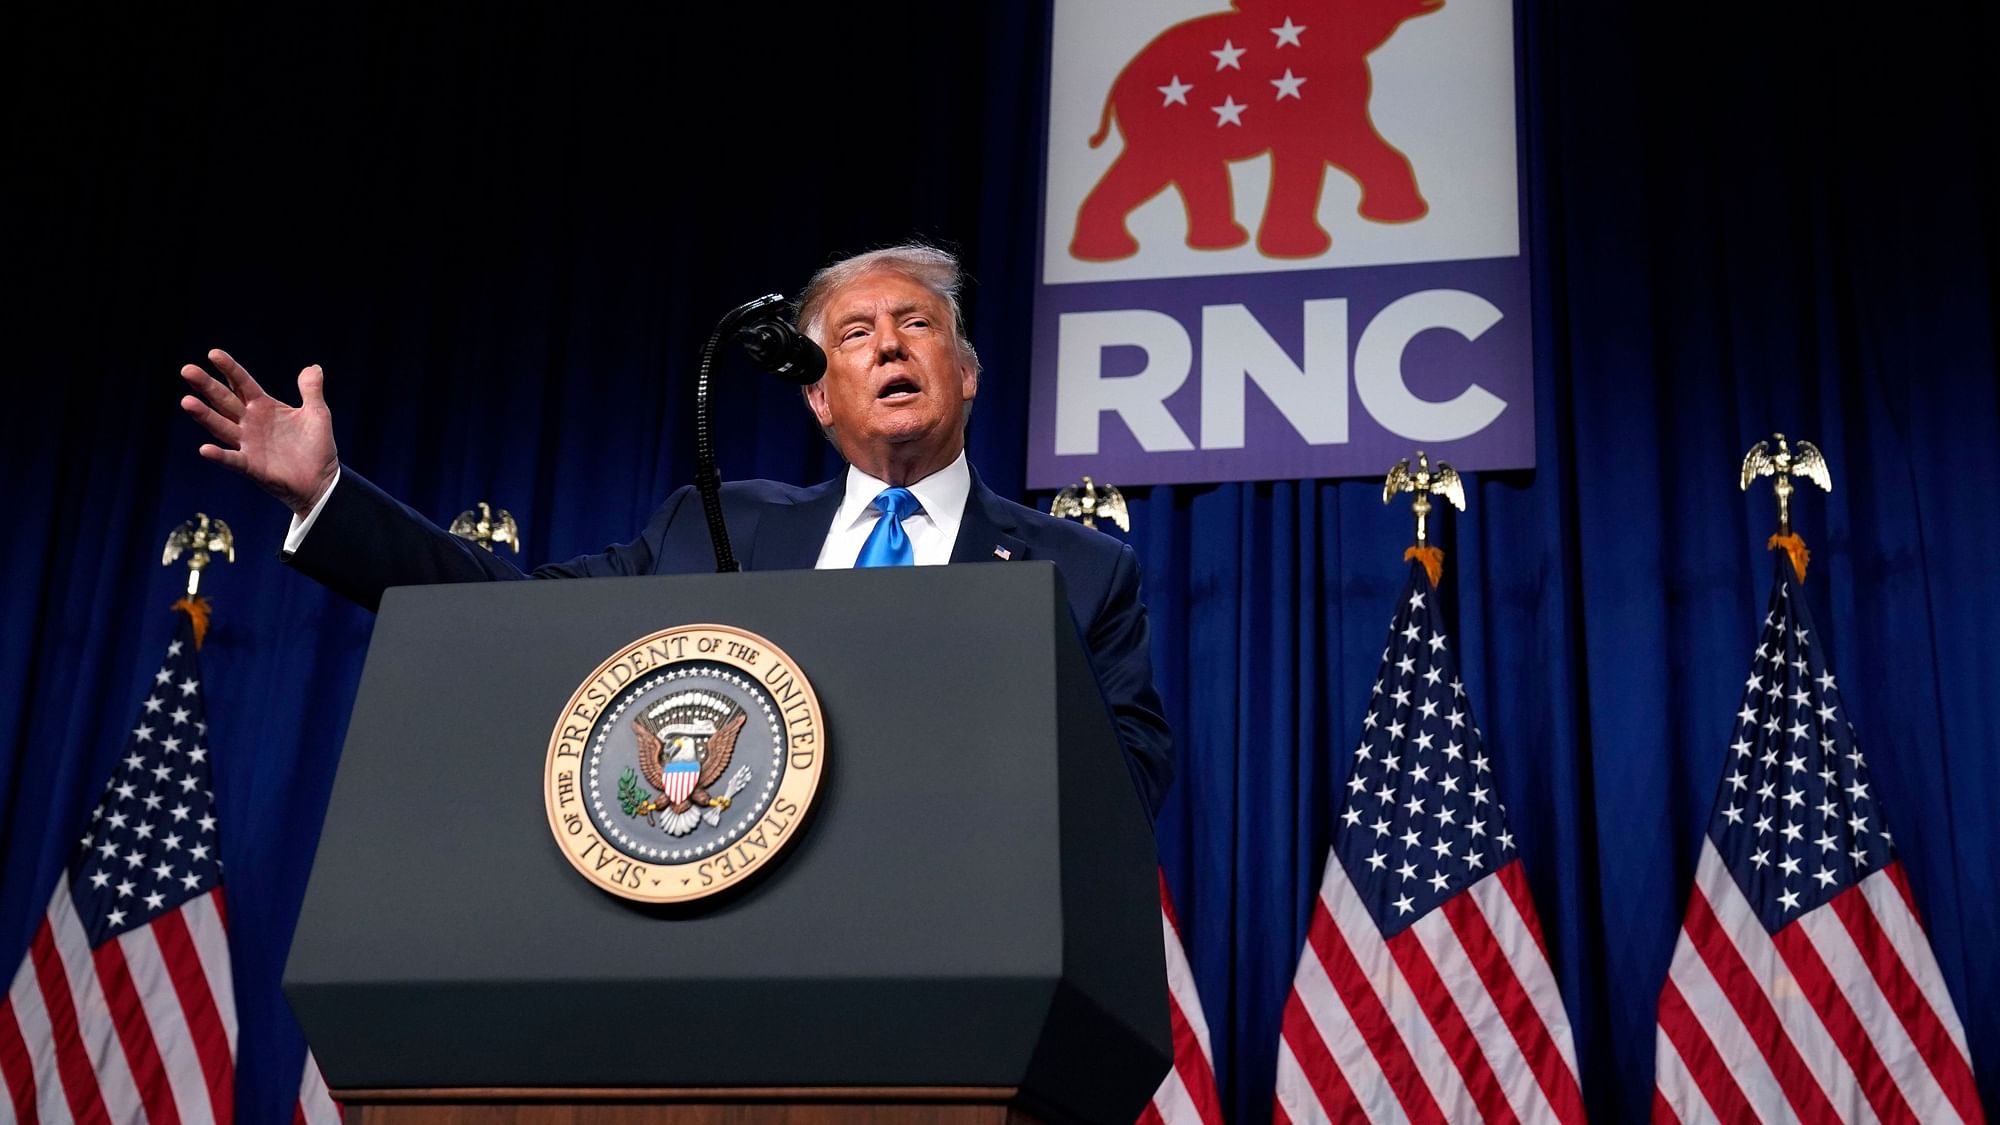 US President Donald Trump vowed to continue the America First agenda after winning renomination at the Republican National Convention on Monday, 24 August.